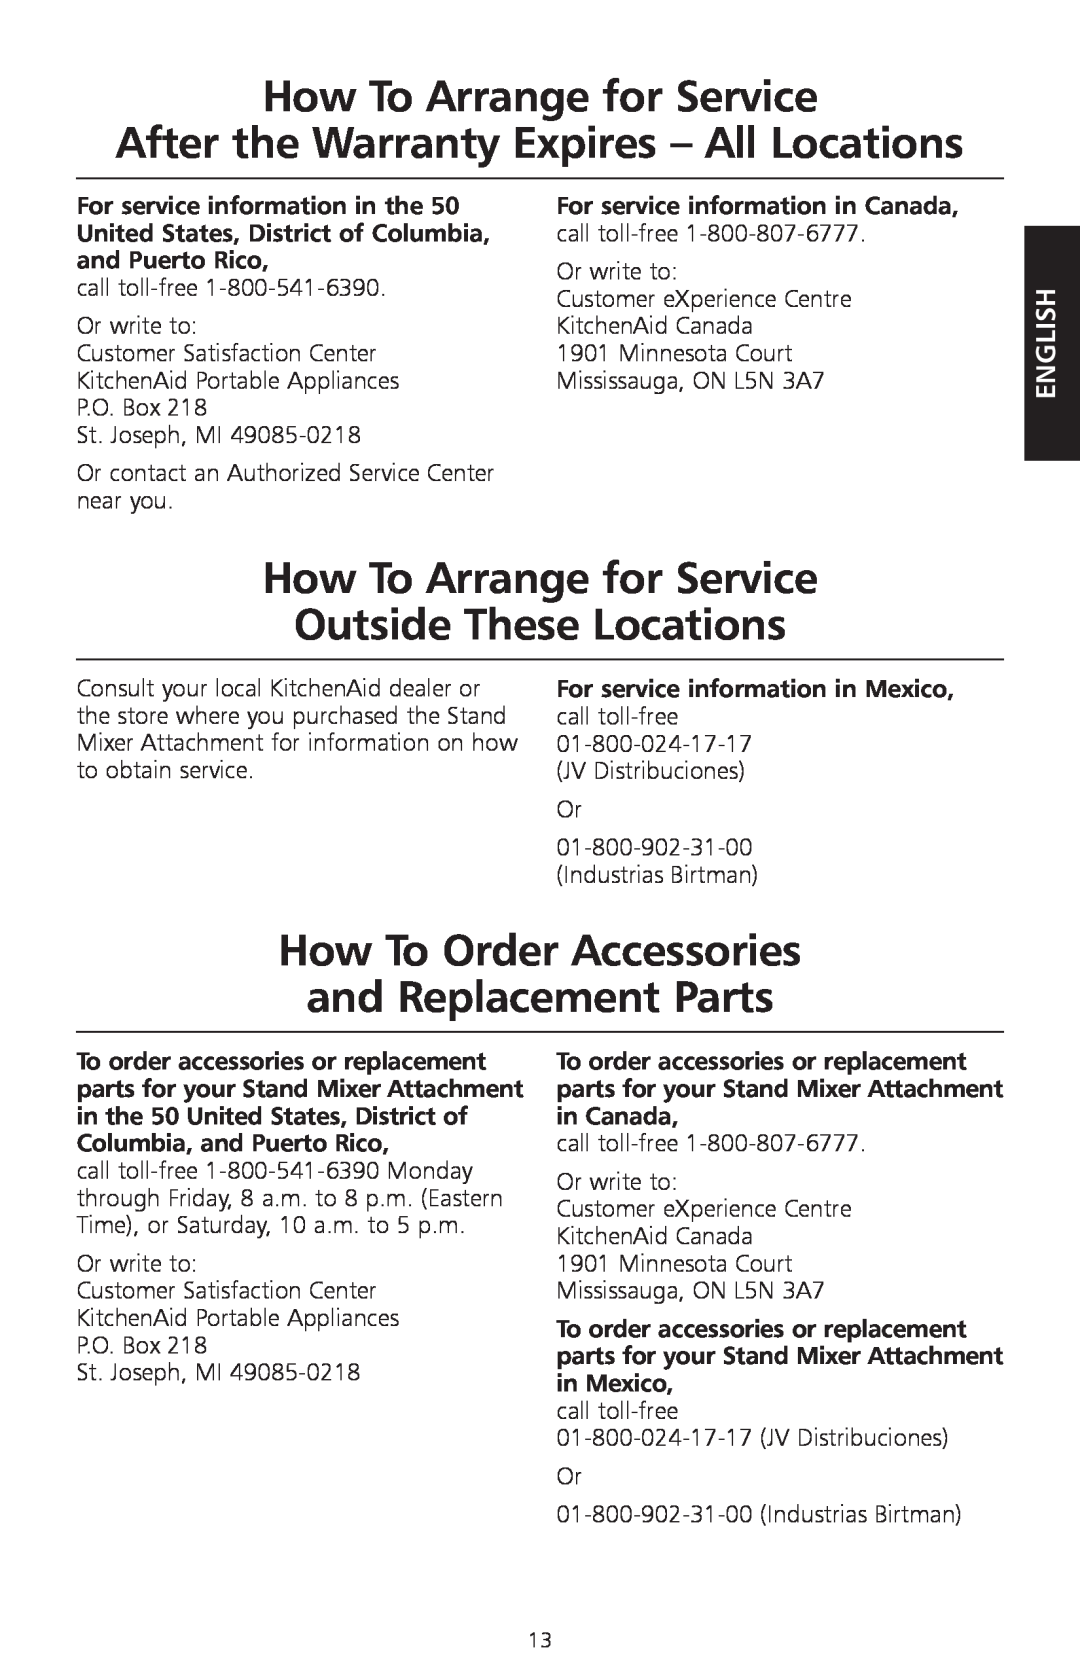 KitchenAid KPEX manual How To Arrange for Service After the Warranty Expires - All Locations, English 